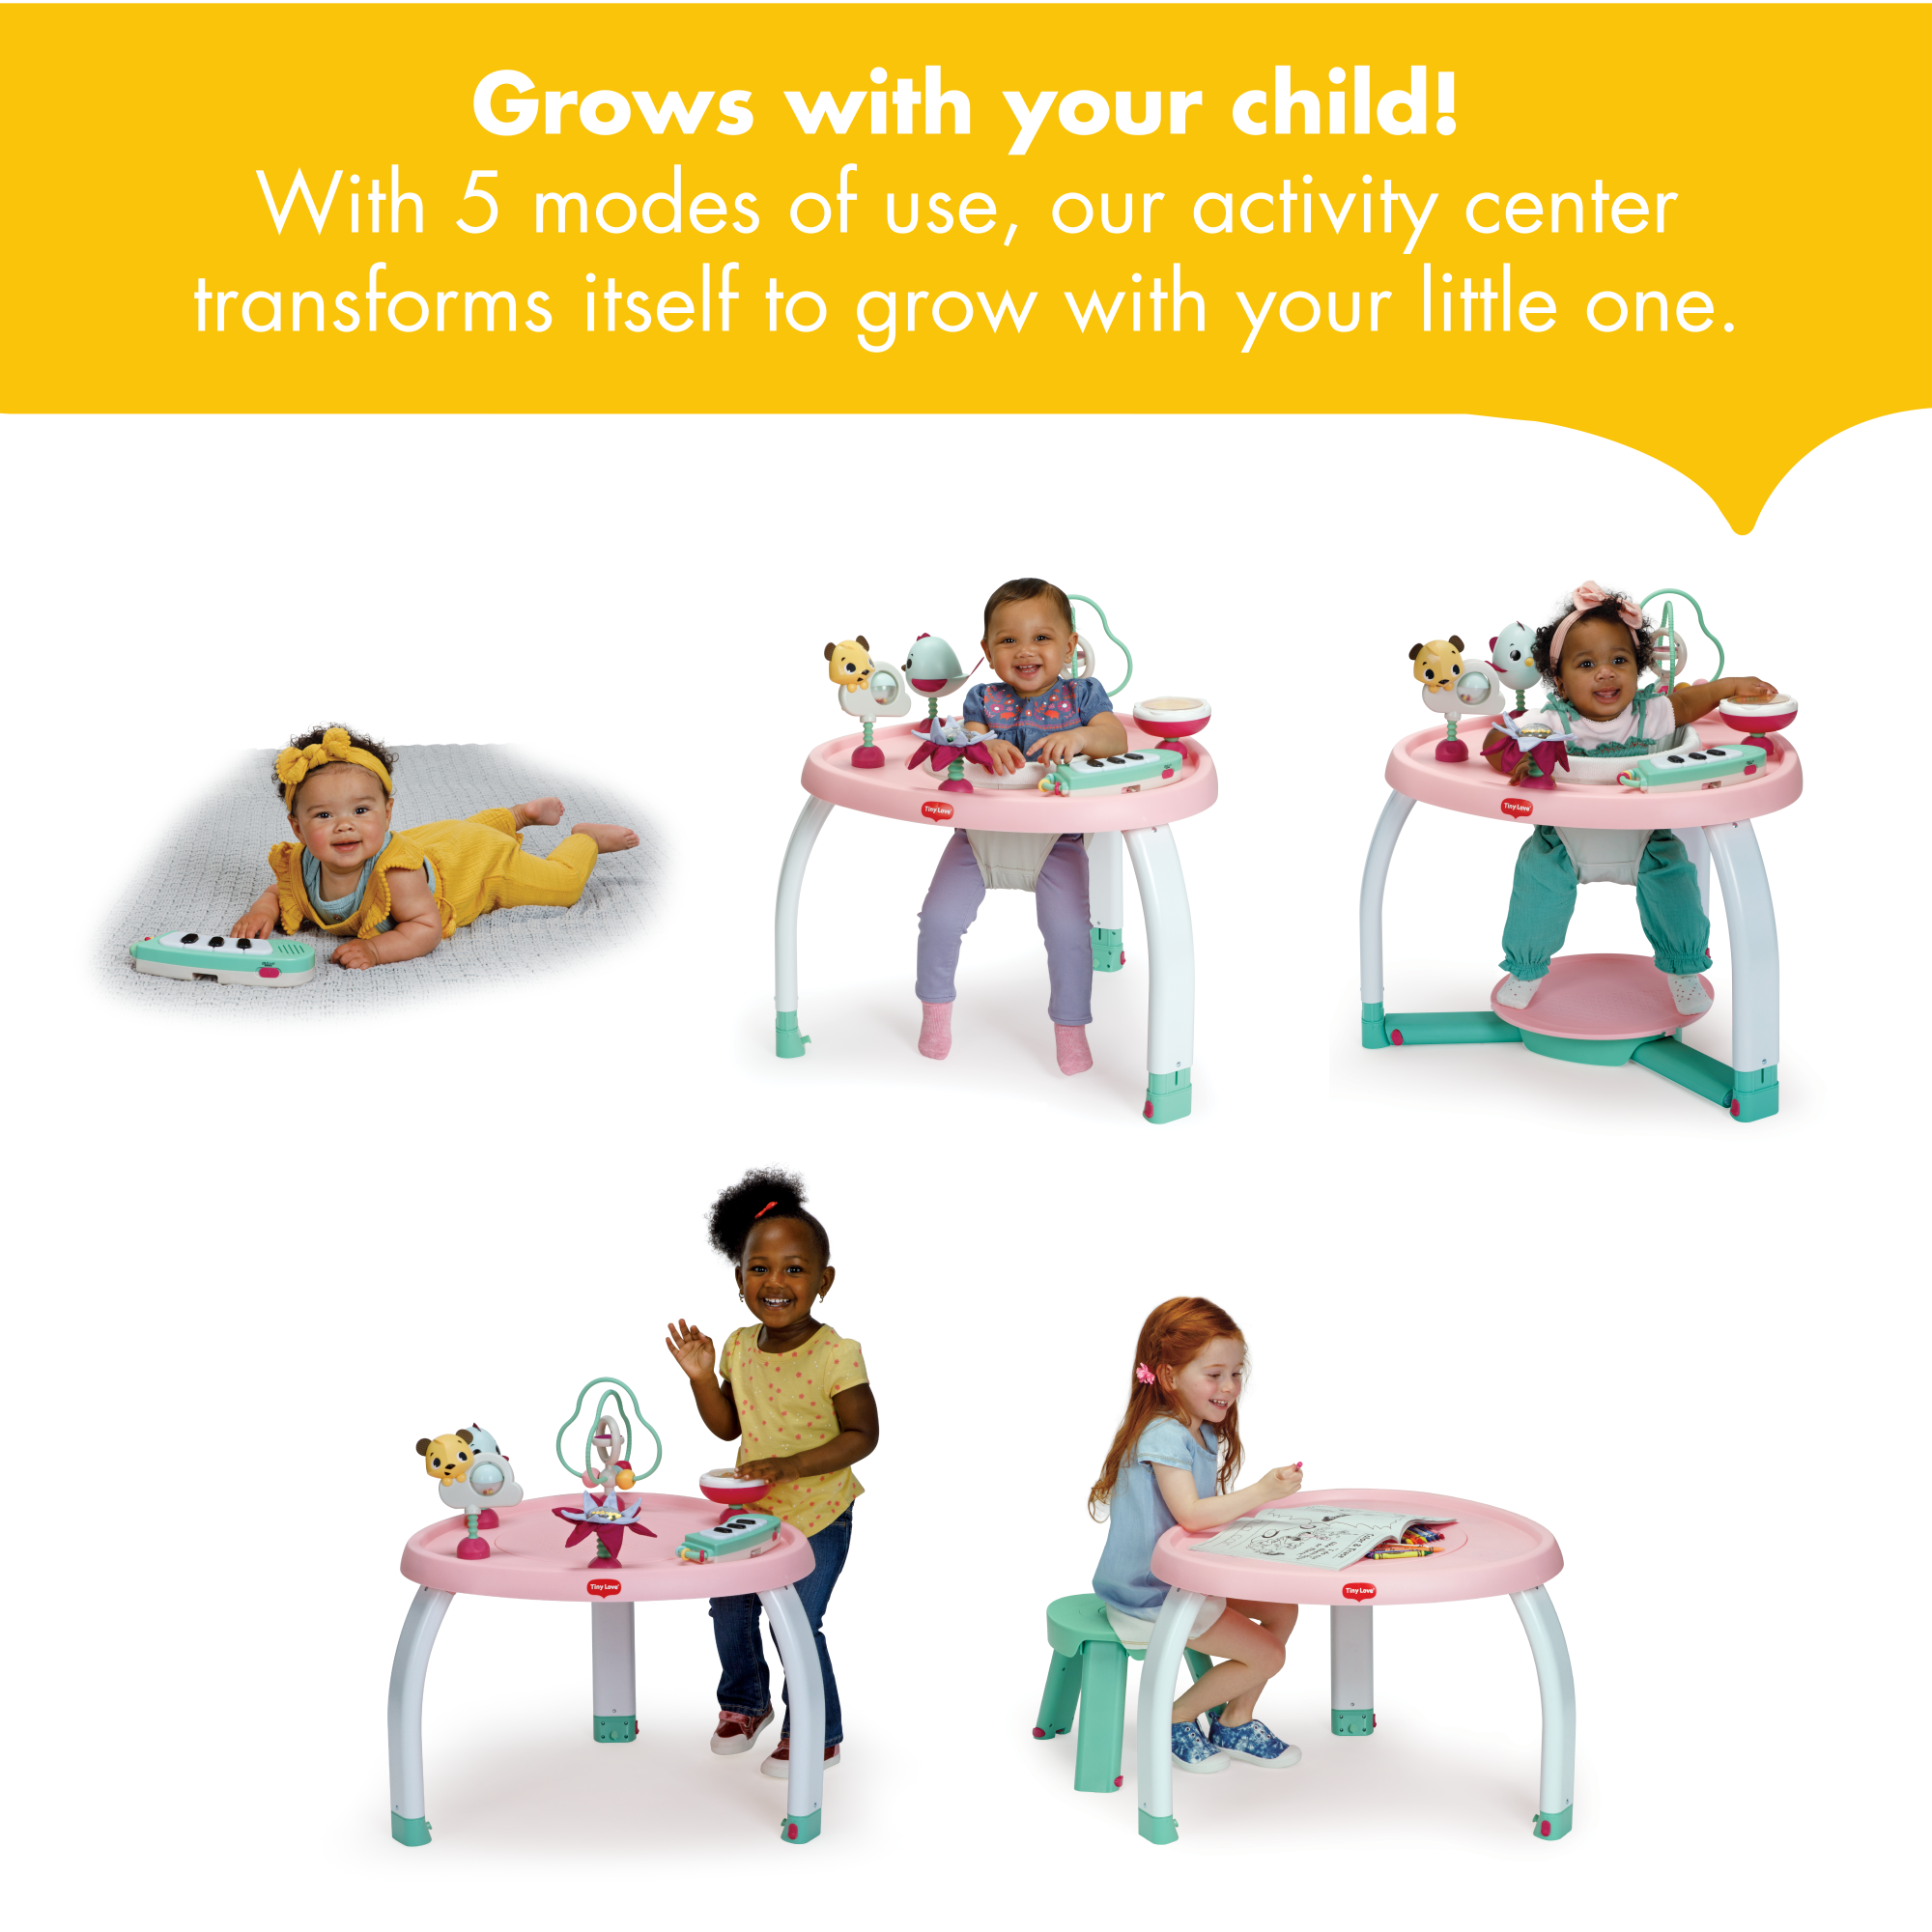 Tiny Love 5-in-1 Here I Grow Stationary Activity Center - grows with your child! With 5 modes of use, our activity center transforms itself to grow with your little one